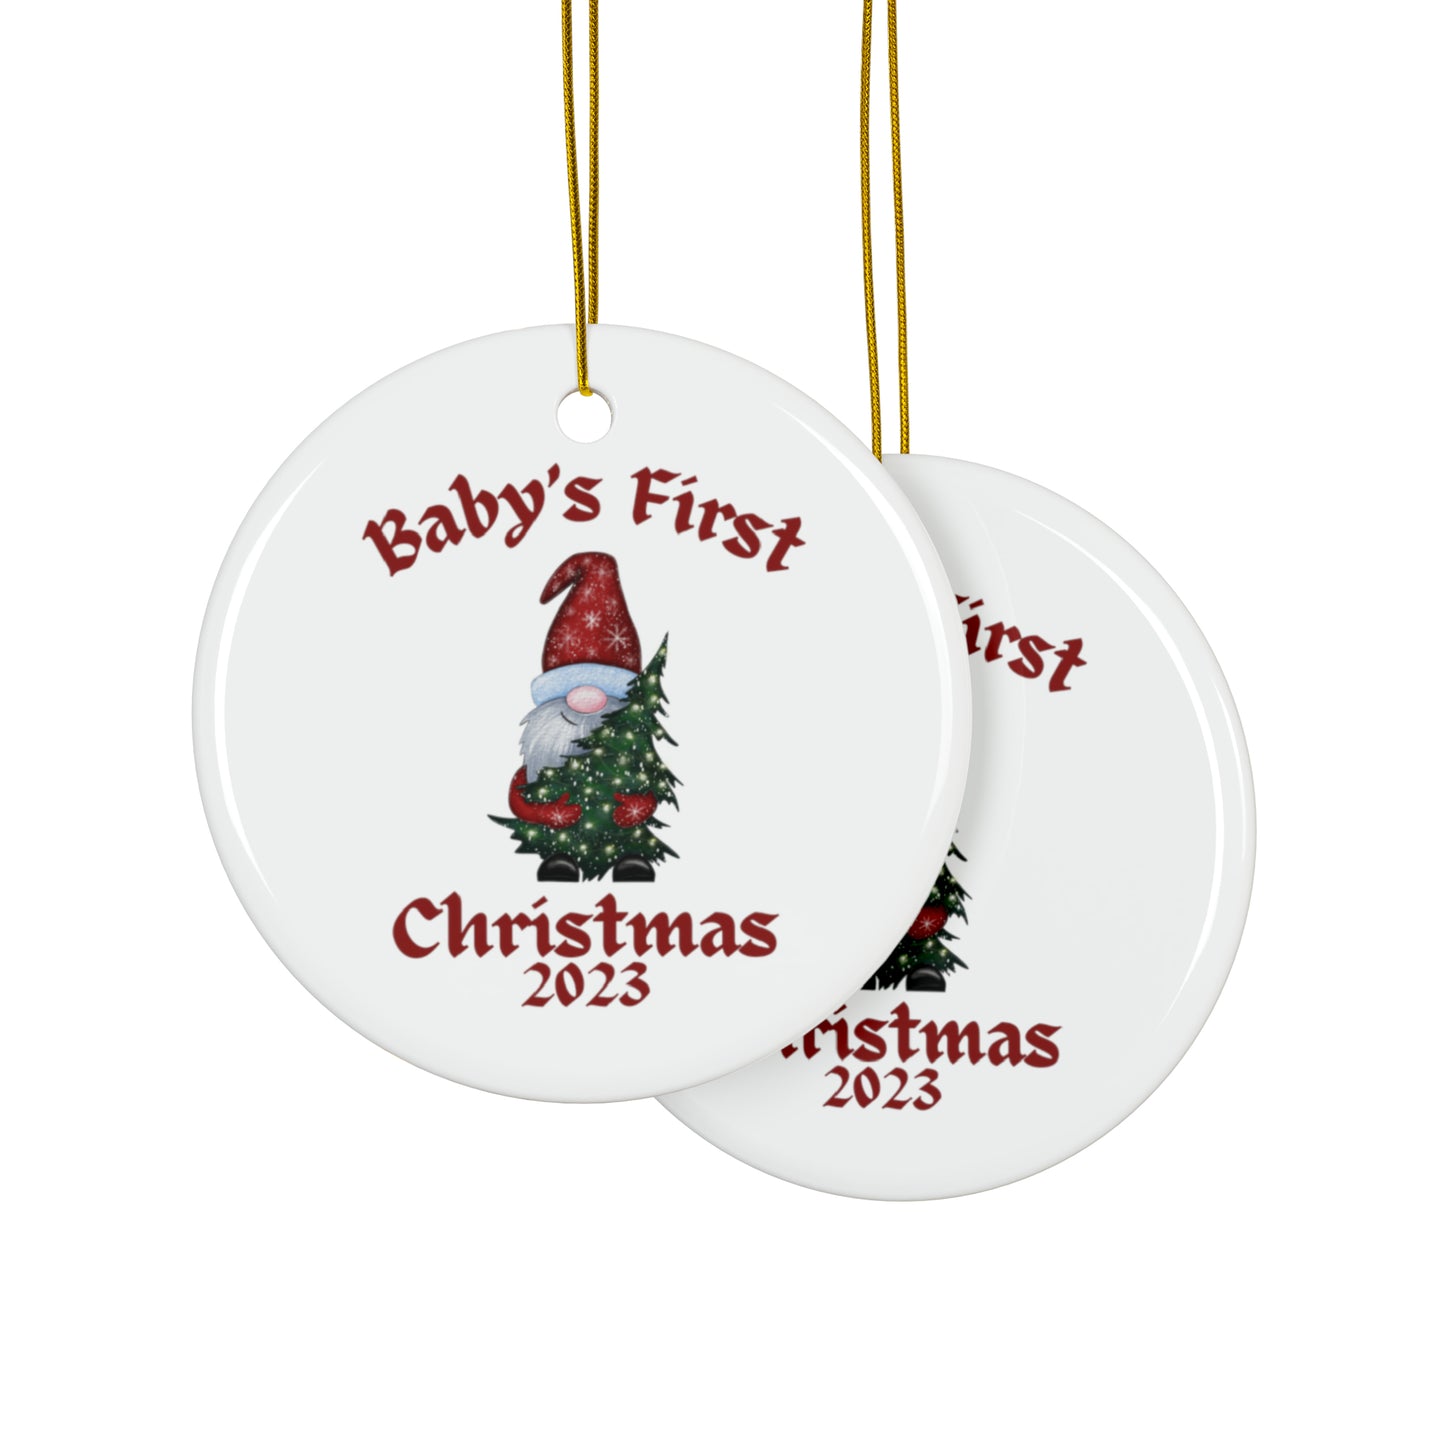 Baby's First Christmas Ceramic Ornament | Cute Christmas Decoration | Baby's First Christmas Gift